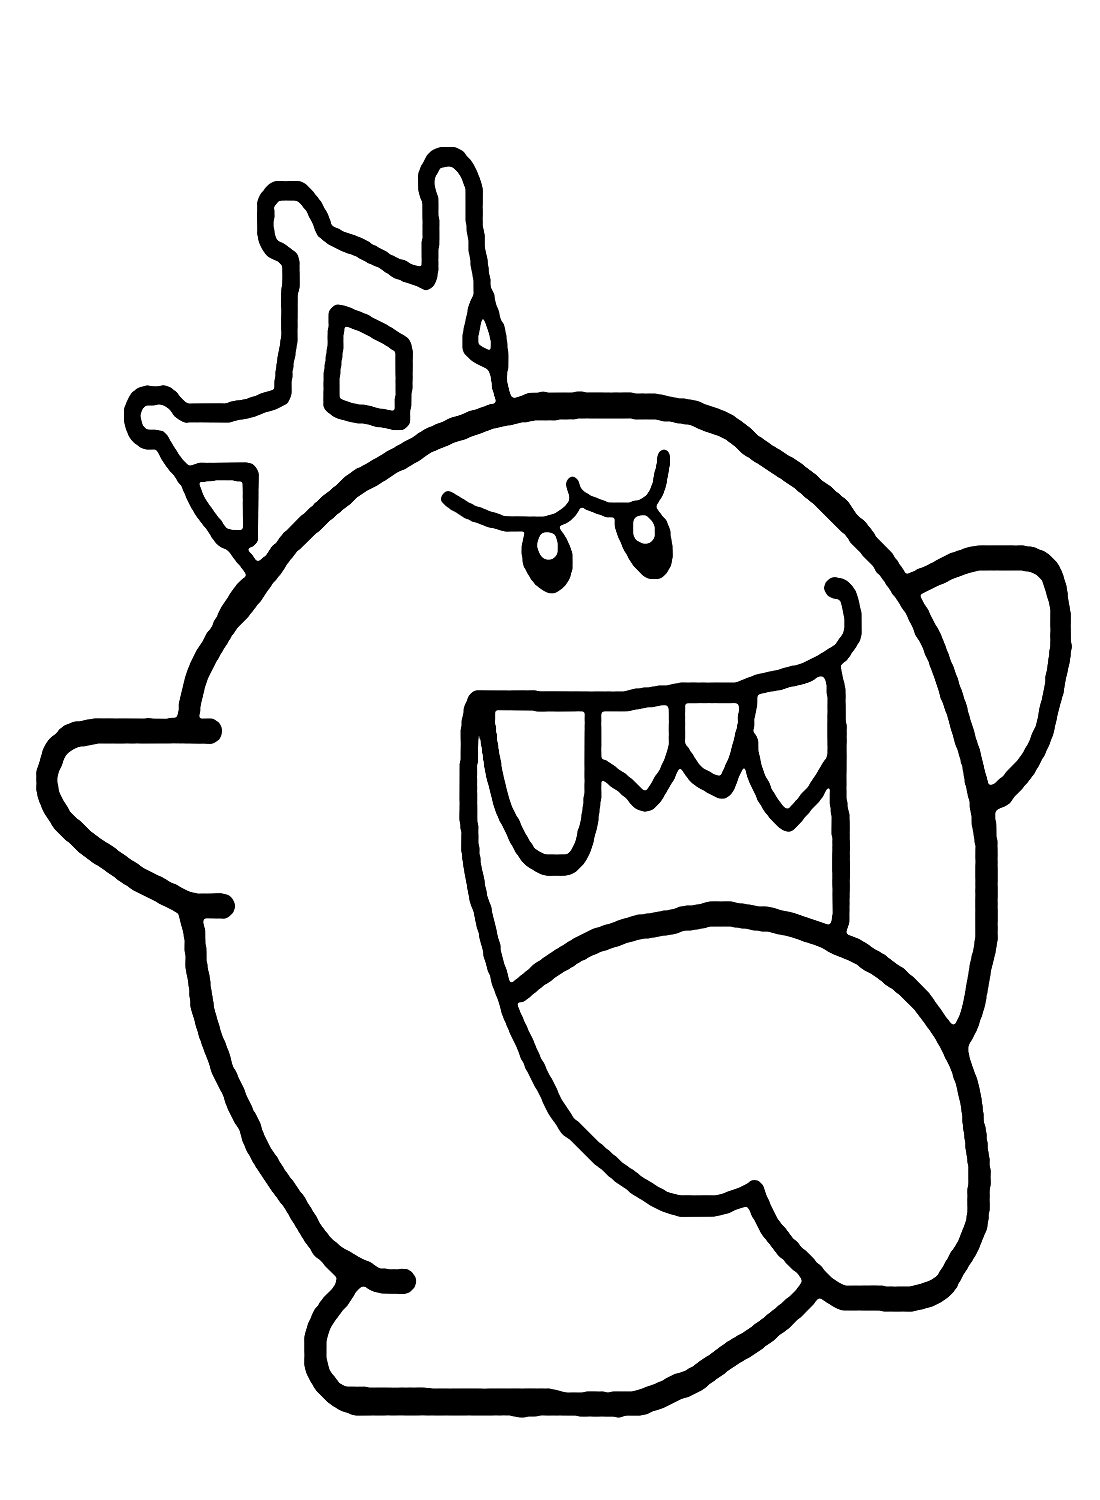 King Boo Super Mario Bros Coloring Pages